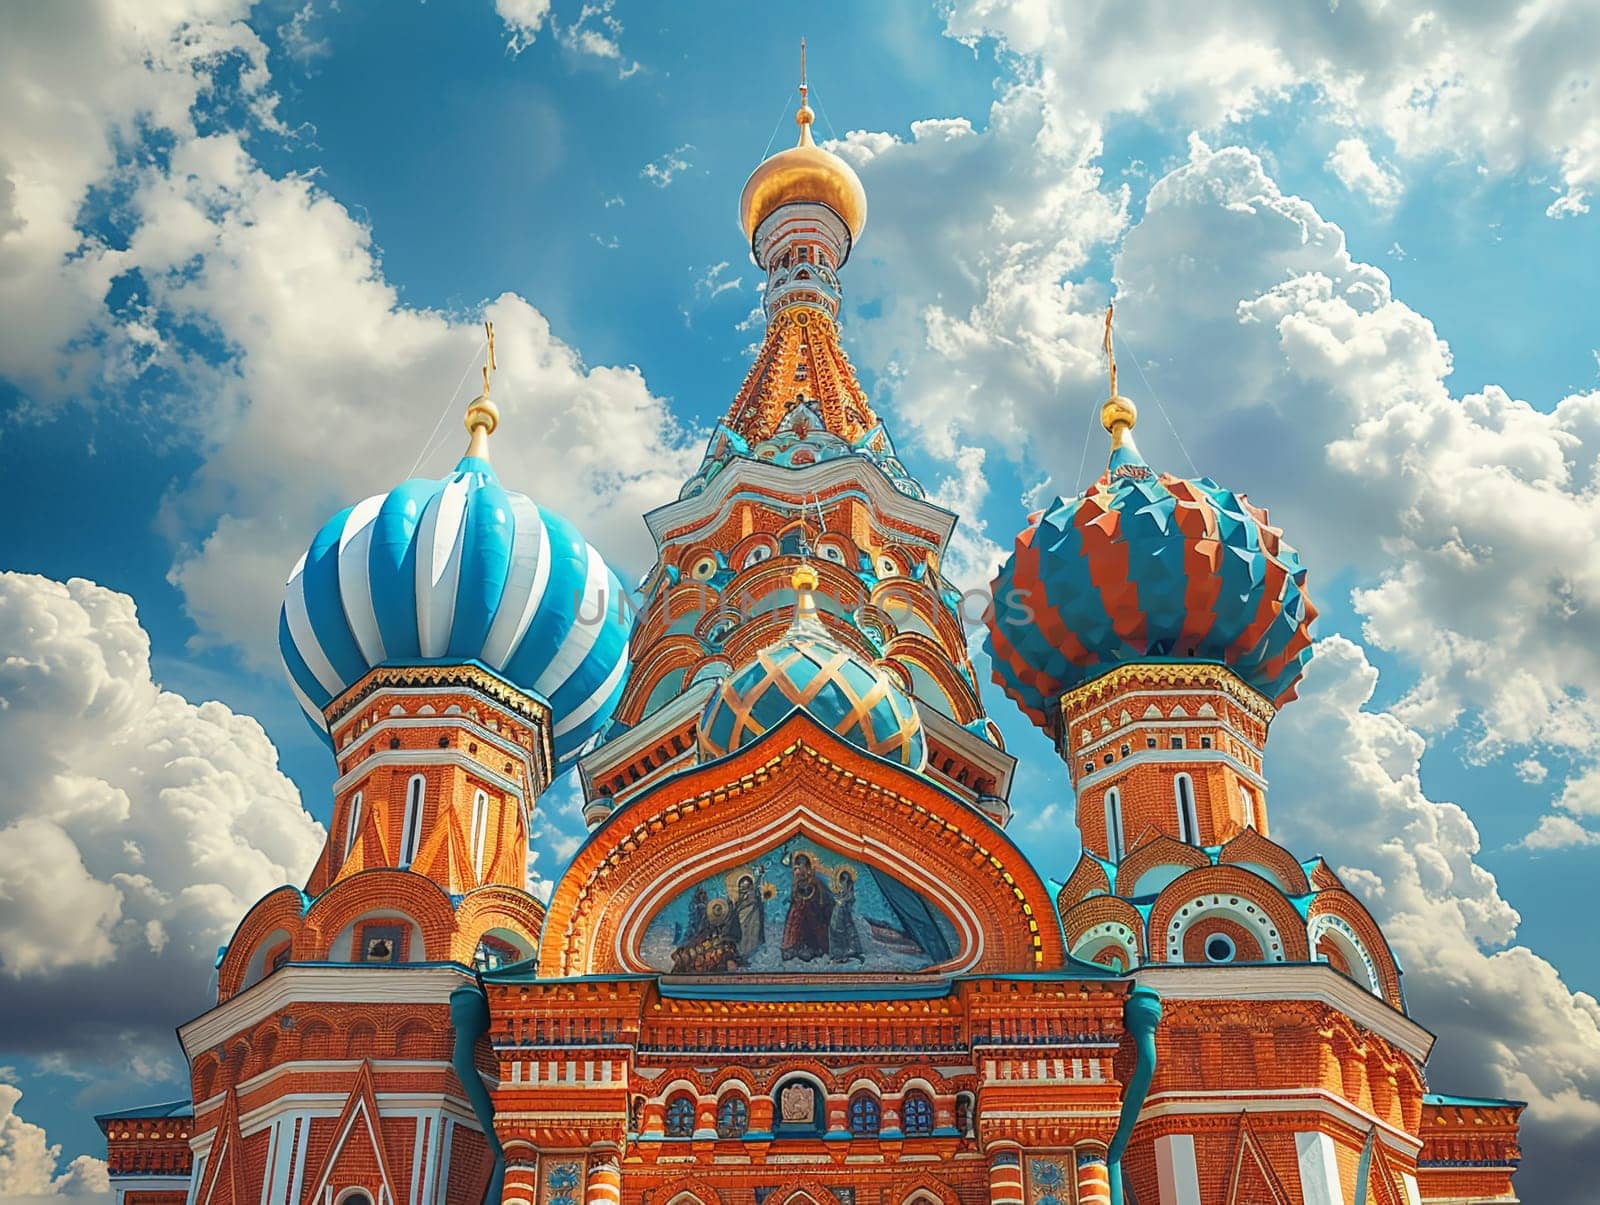 Orthodox Russian Onion Domes Against a Blurred Sky, The domes meld with the clouds, iconic of Russia's religious architecture and faith.